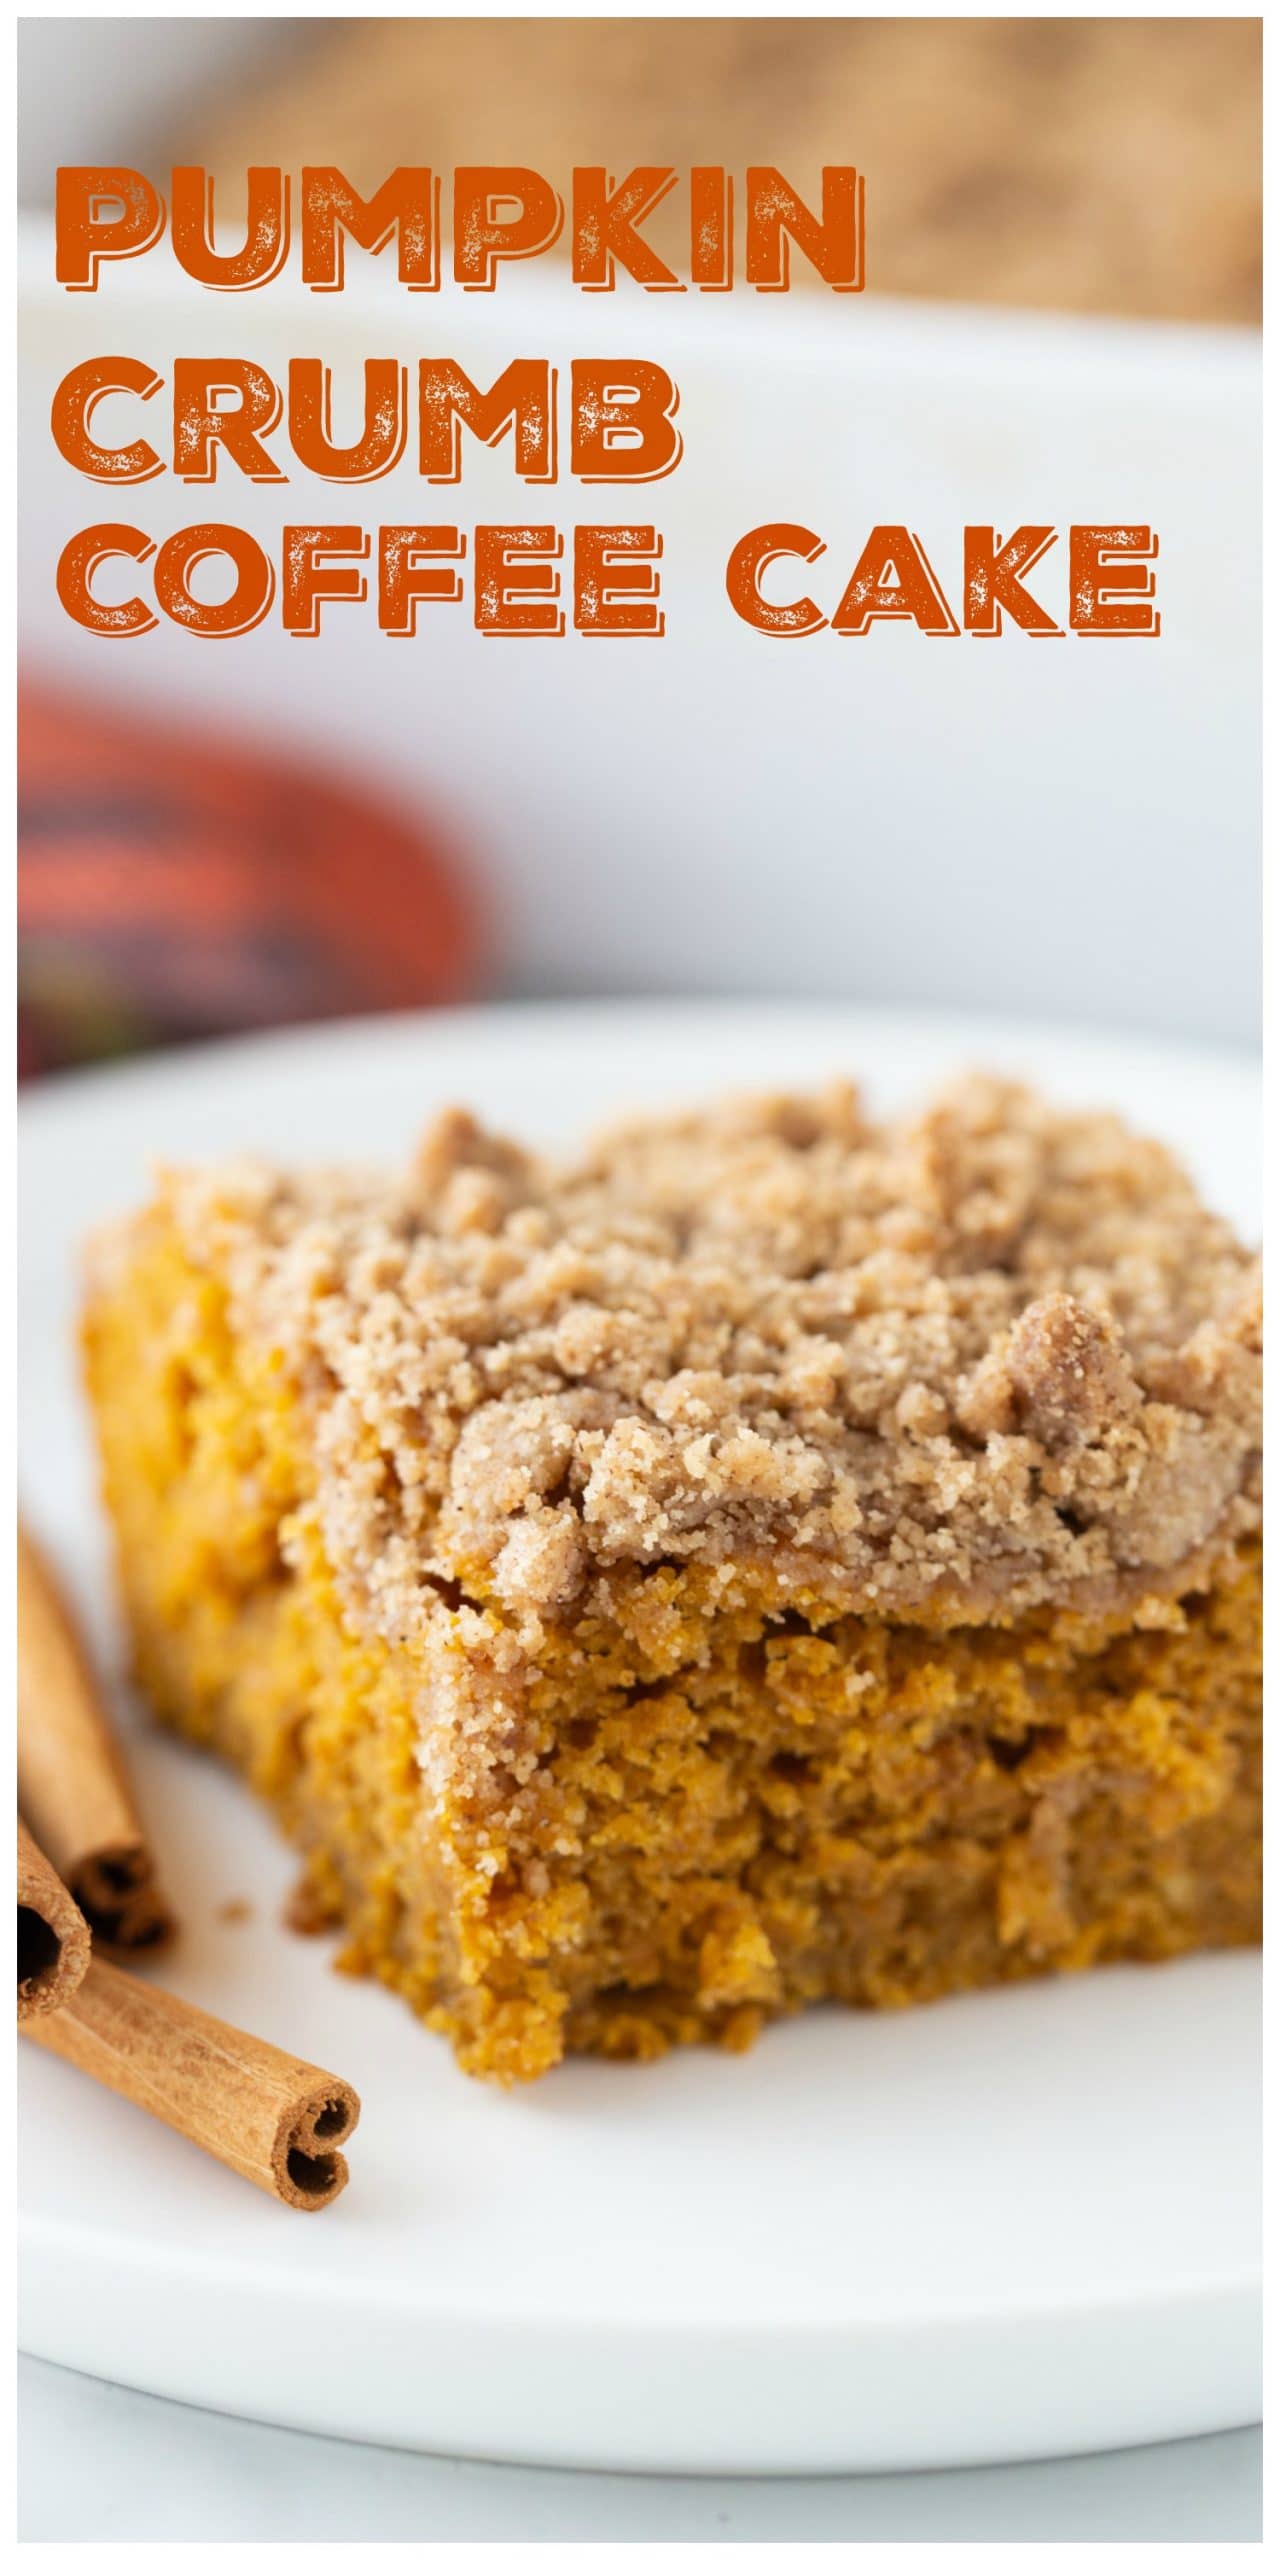 This Pumpkin Coffee Cake recipe tastes like fall. A cozy and generous mix of spices - cinnamon, ginger and nutmeg, along with a rich crumb topping make this coffee cake a perfect, seasonal treat.  via @cmpollak1